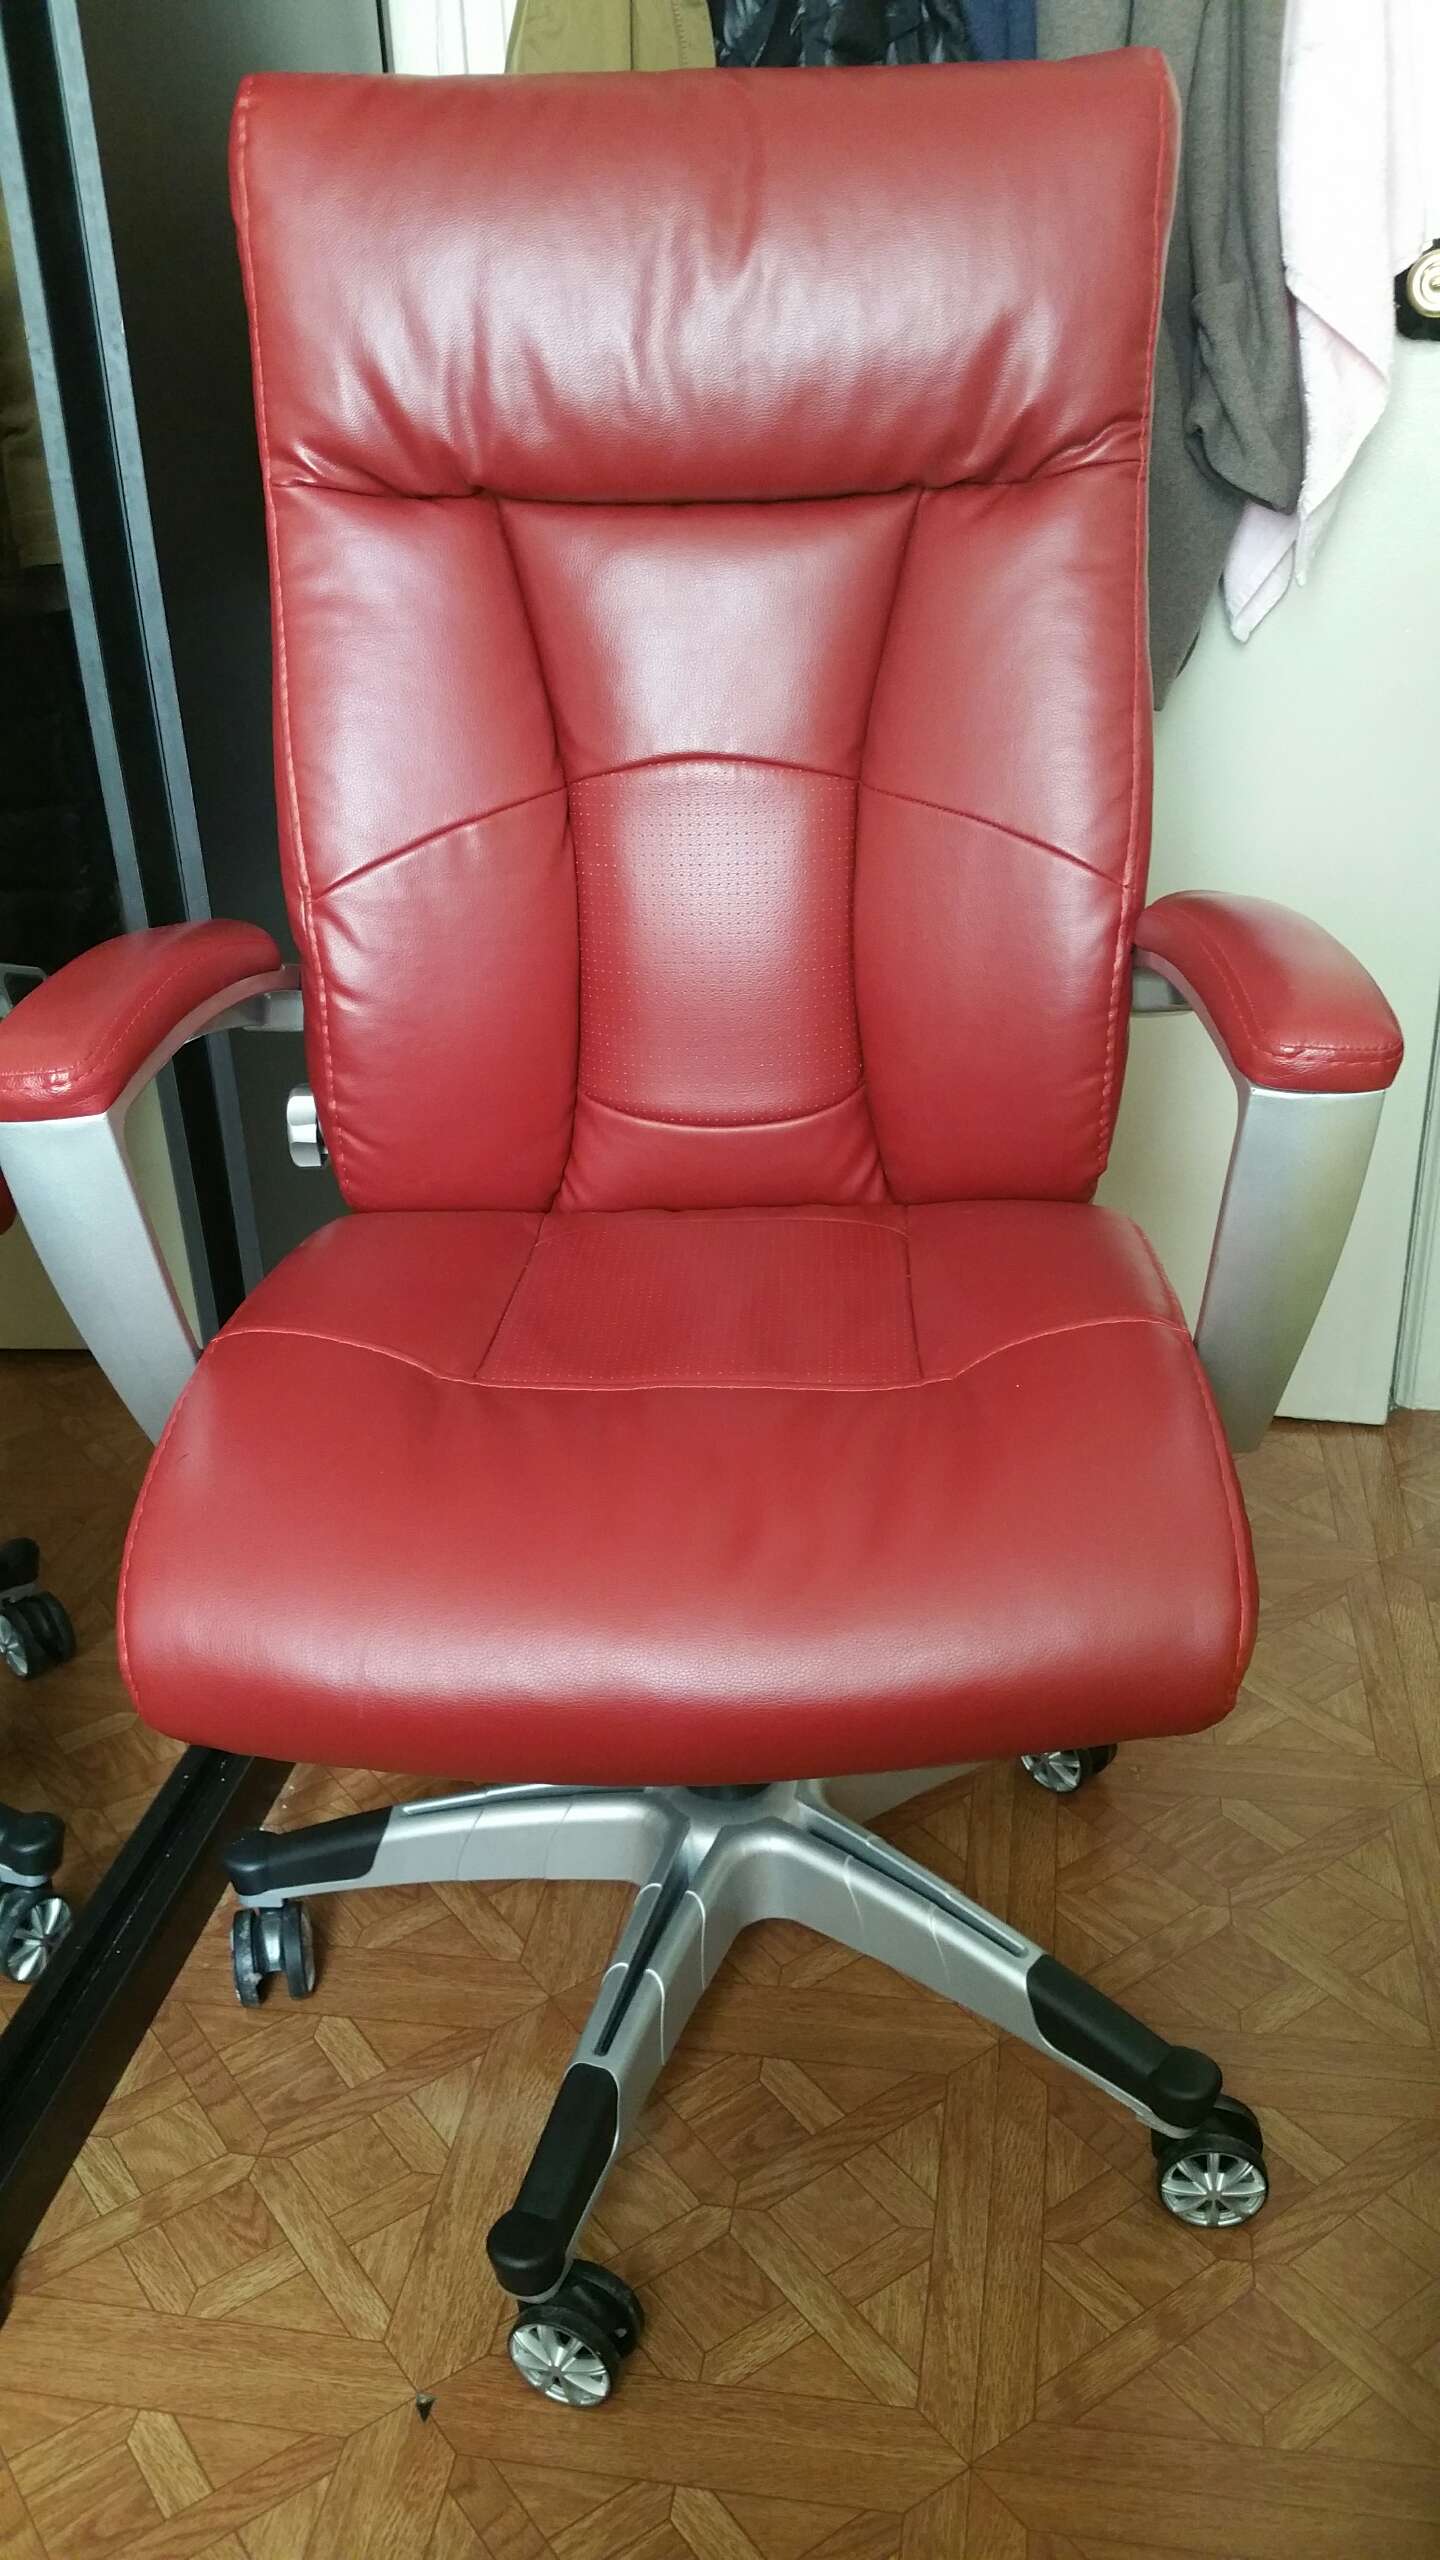 Sealy Roma Bonded Leather Executive Chair, Red for sale in New York, NY